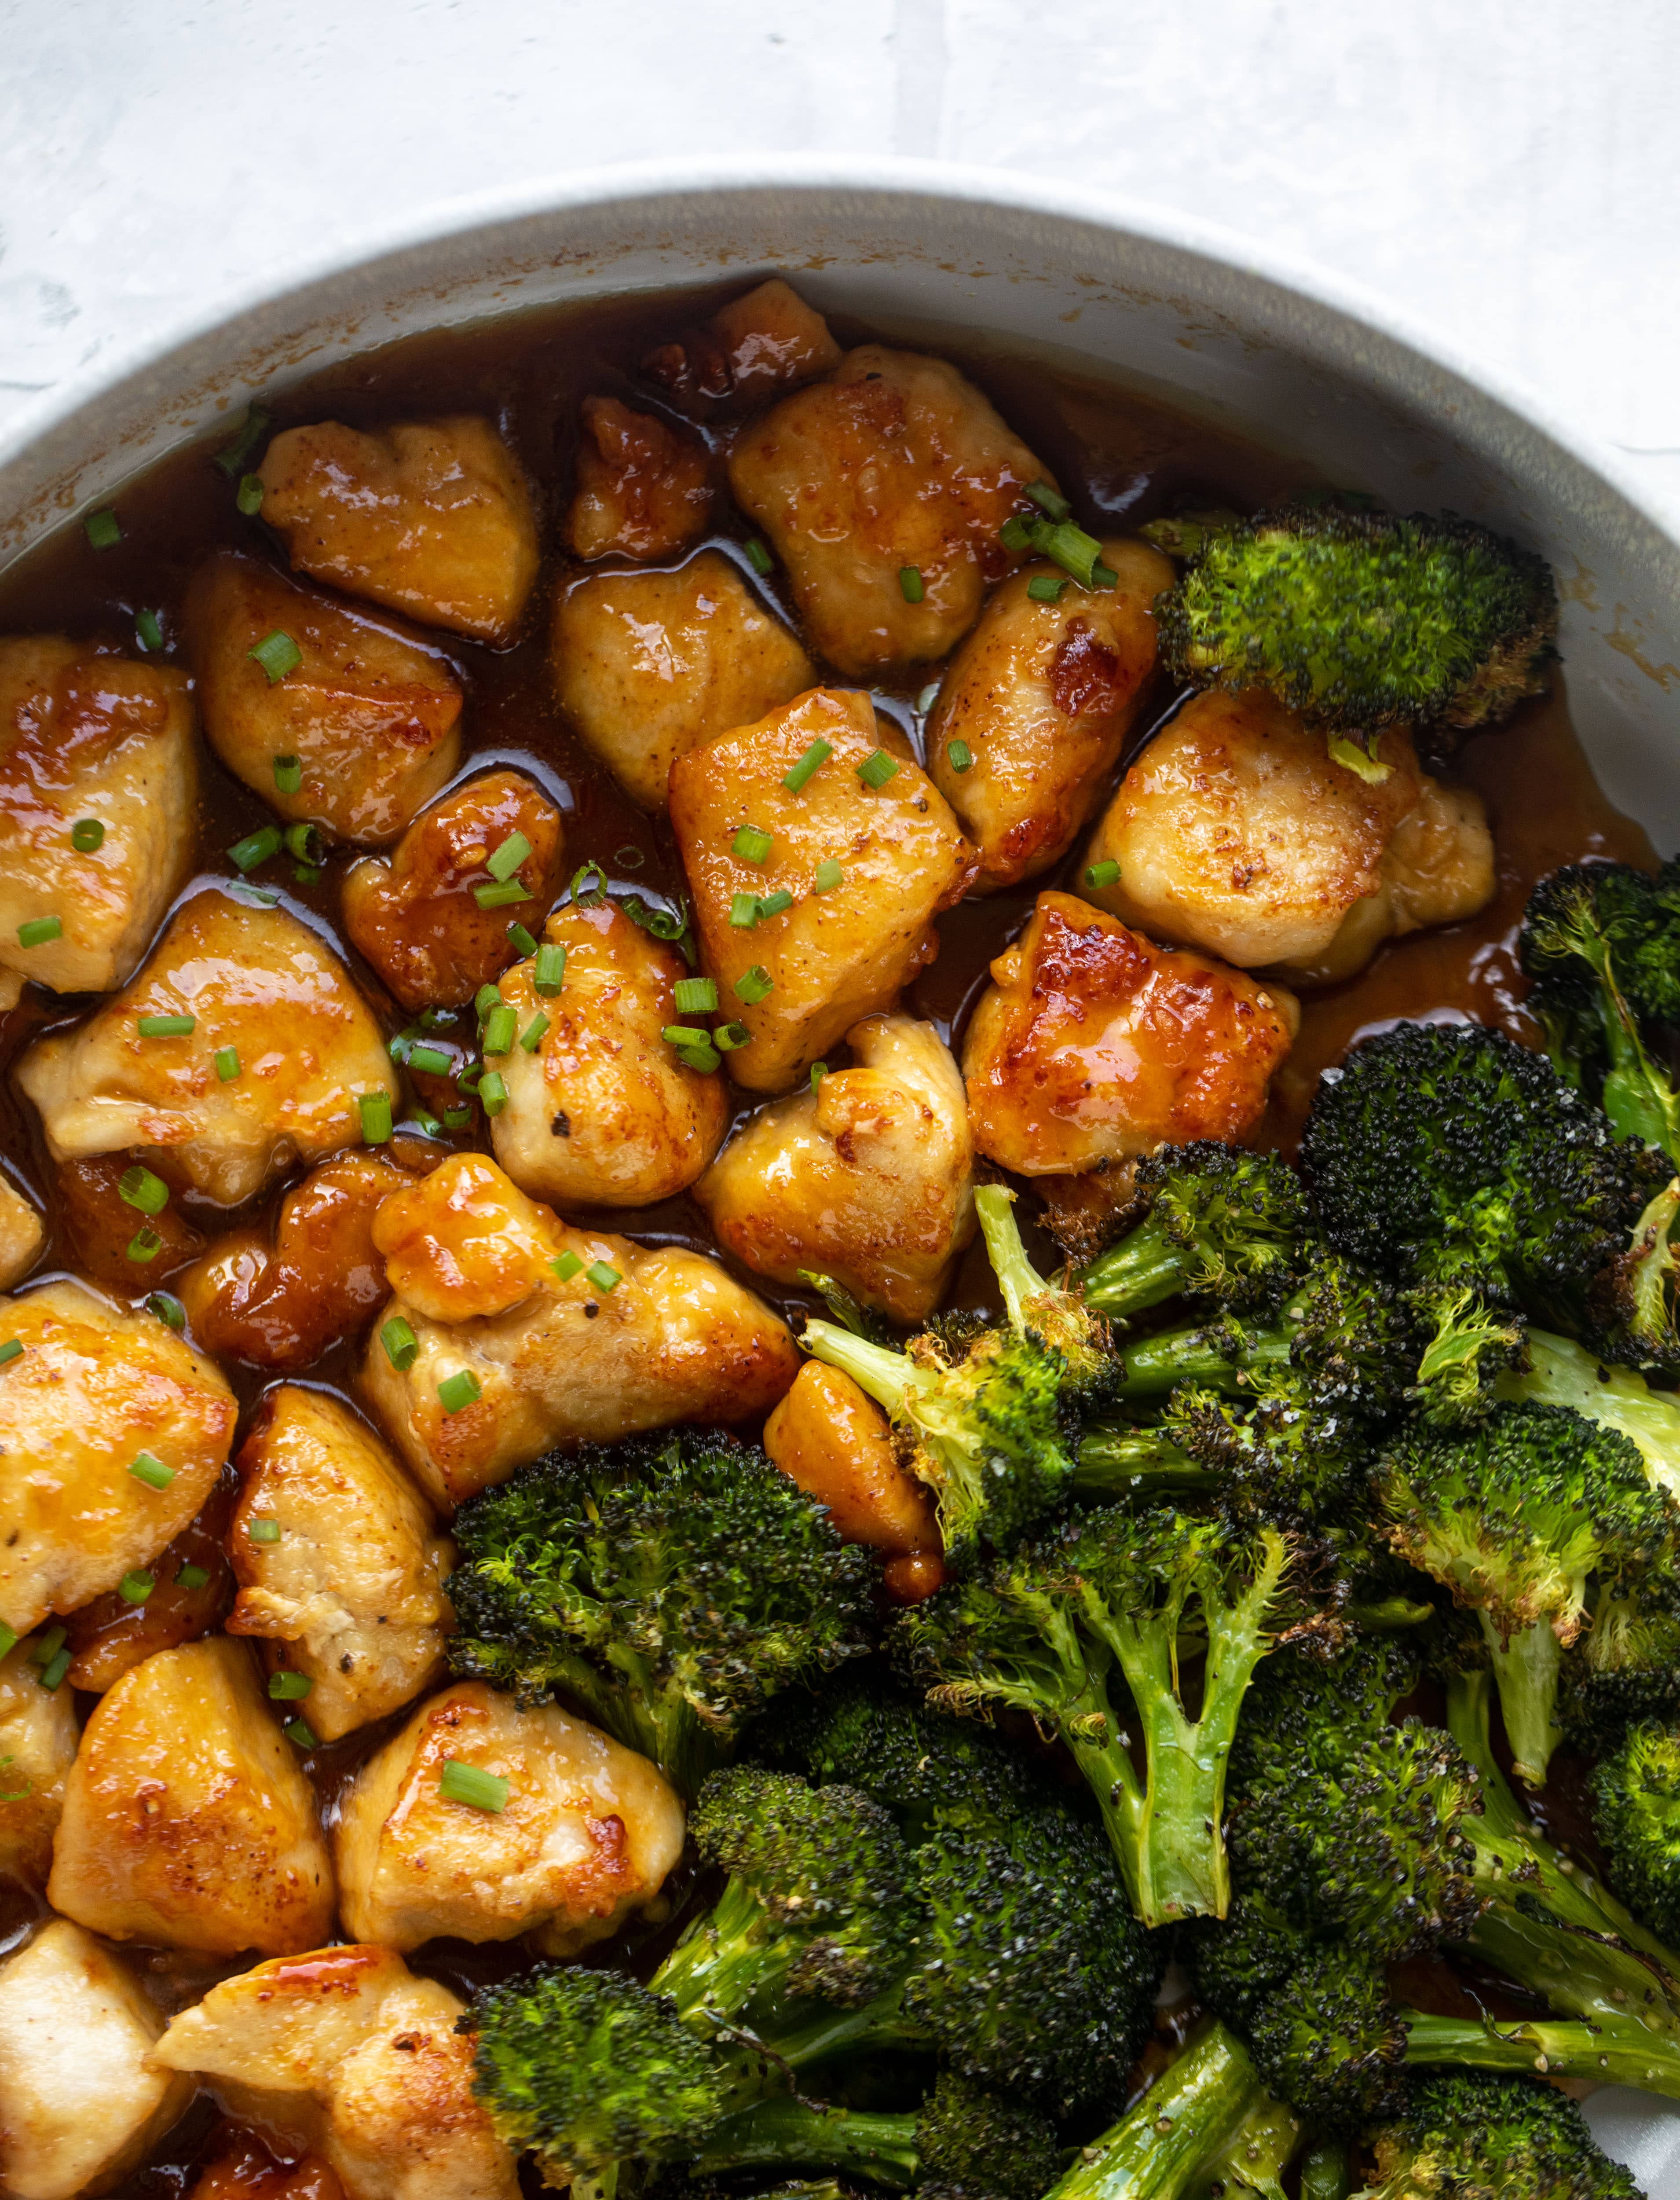 This sticky apricot chicken is so juicy and delicious! The chicken is seared and glazed with a jammy apricot sauce. Serve with broccoli and rice!